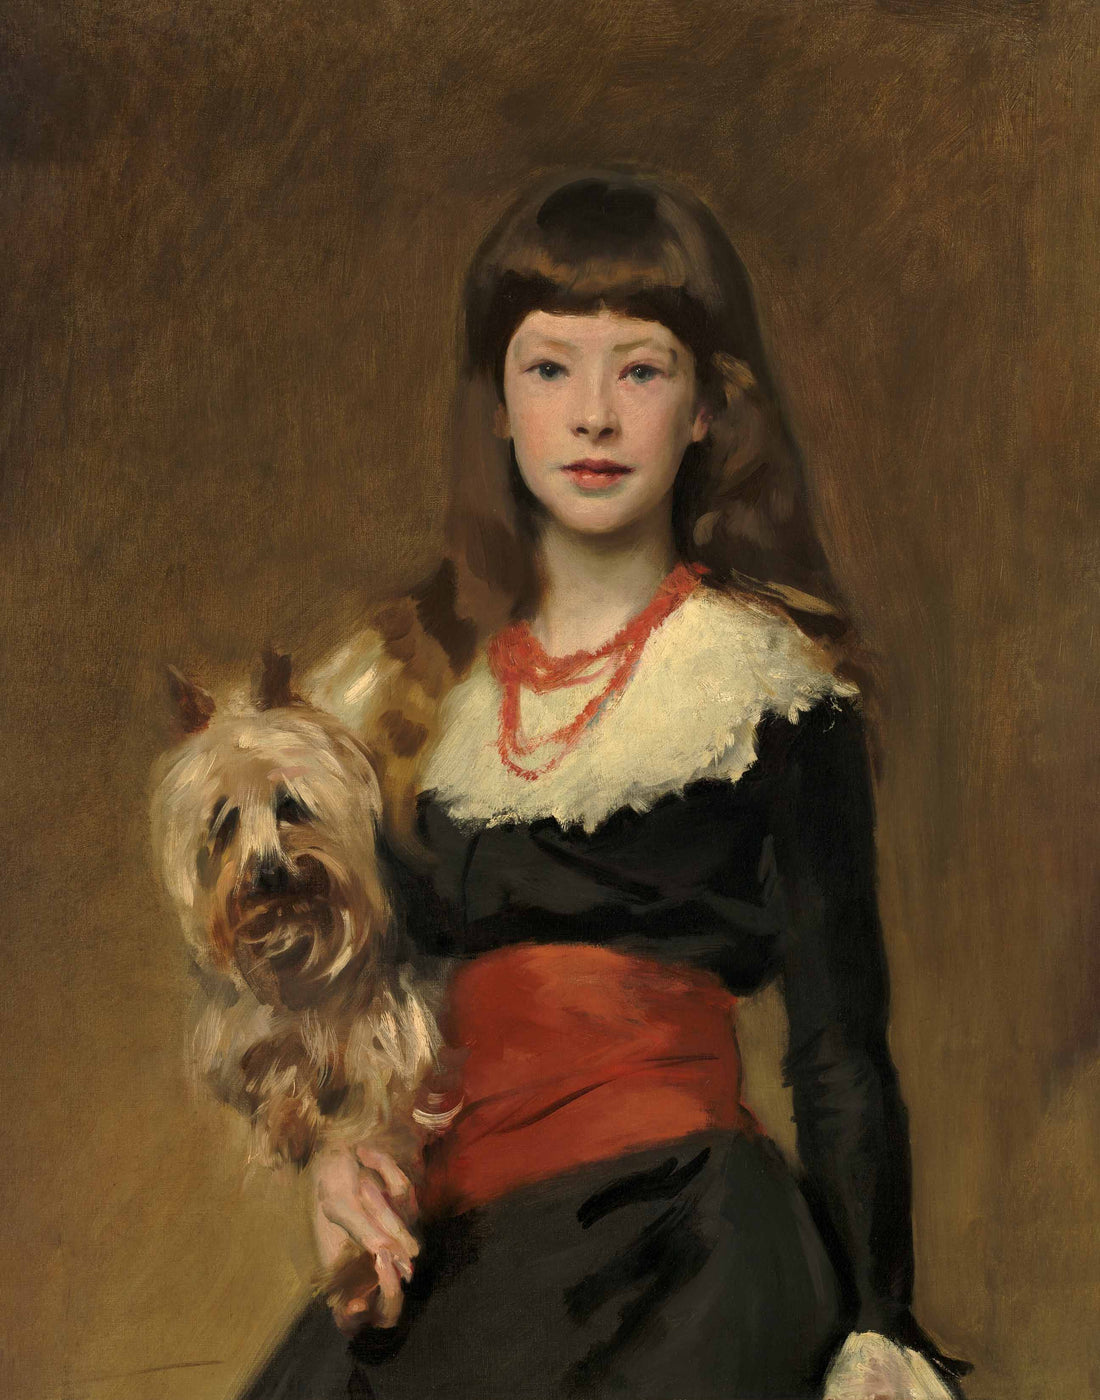 Portrait of Girl with Her Dog